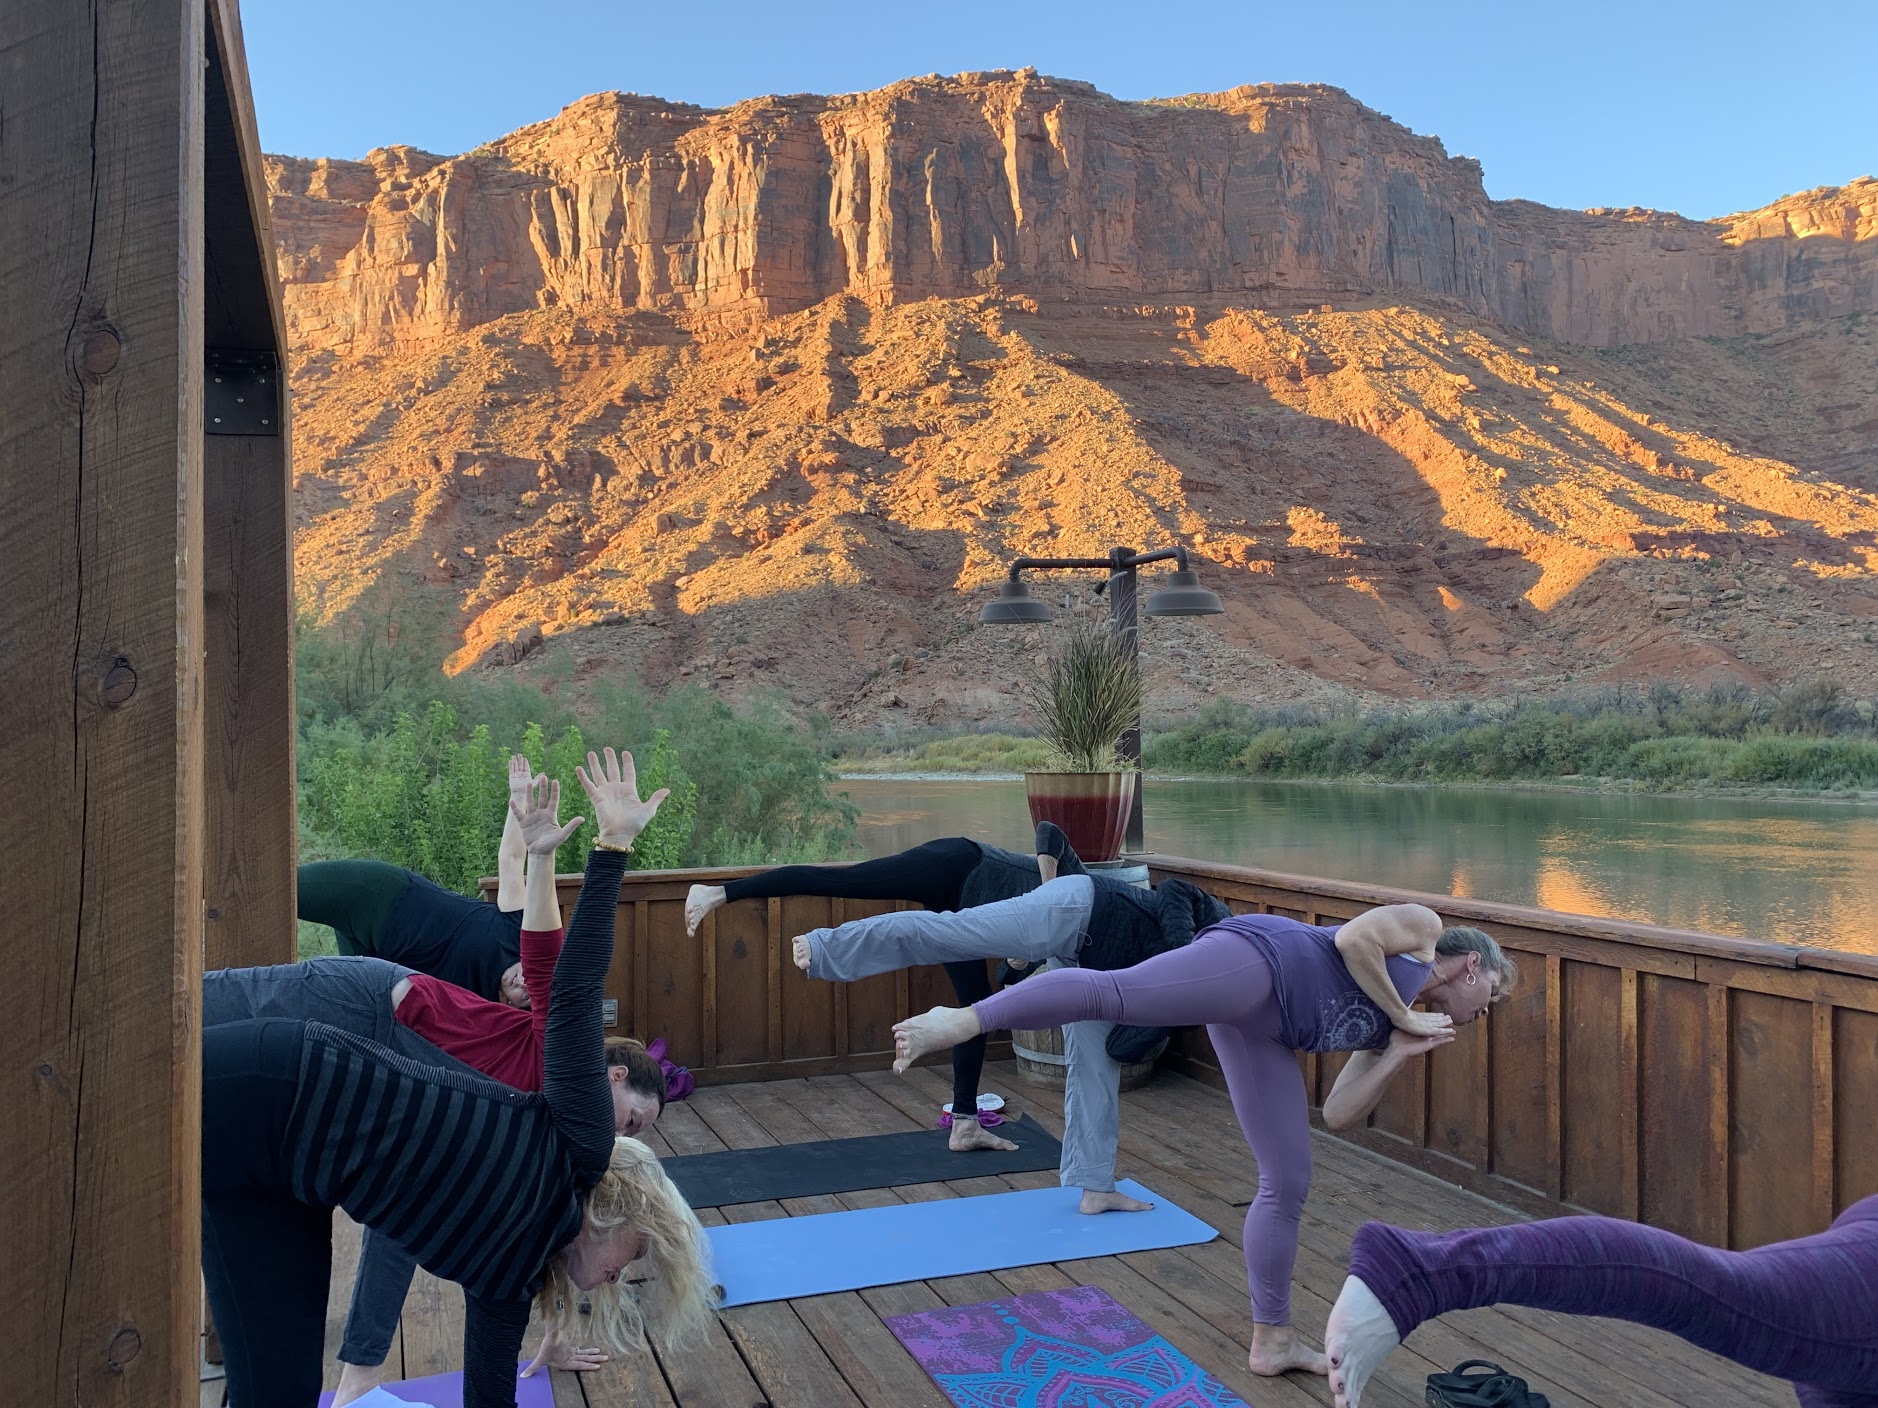 Yoga retreat in the Canyonlands